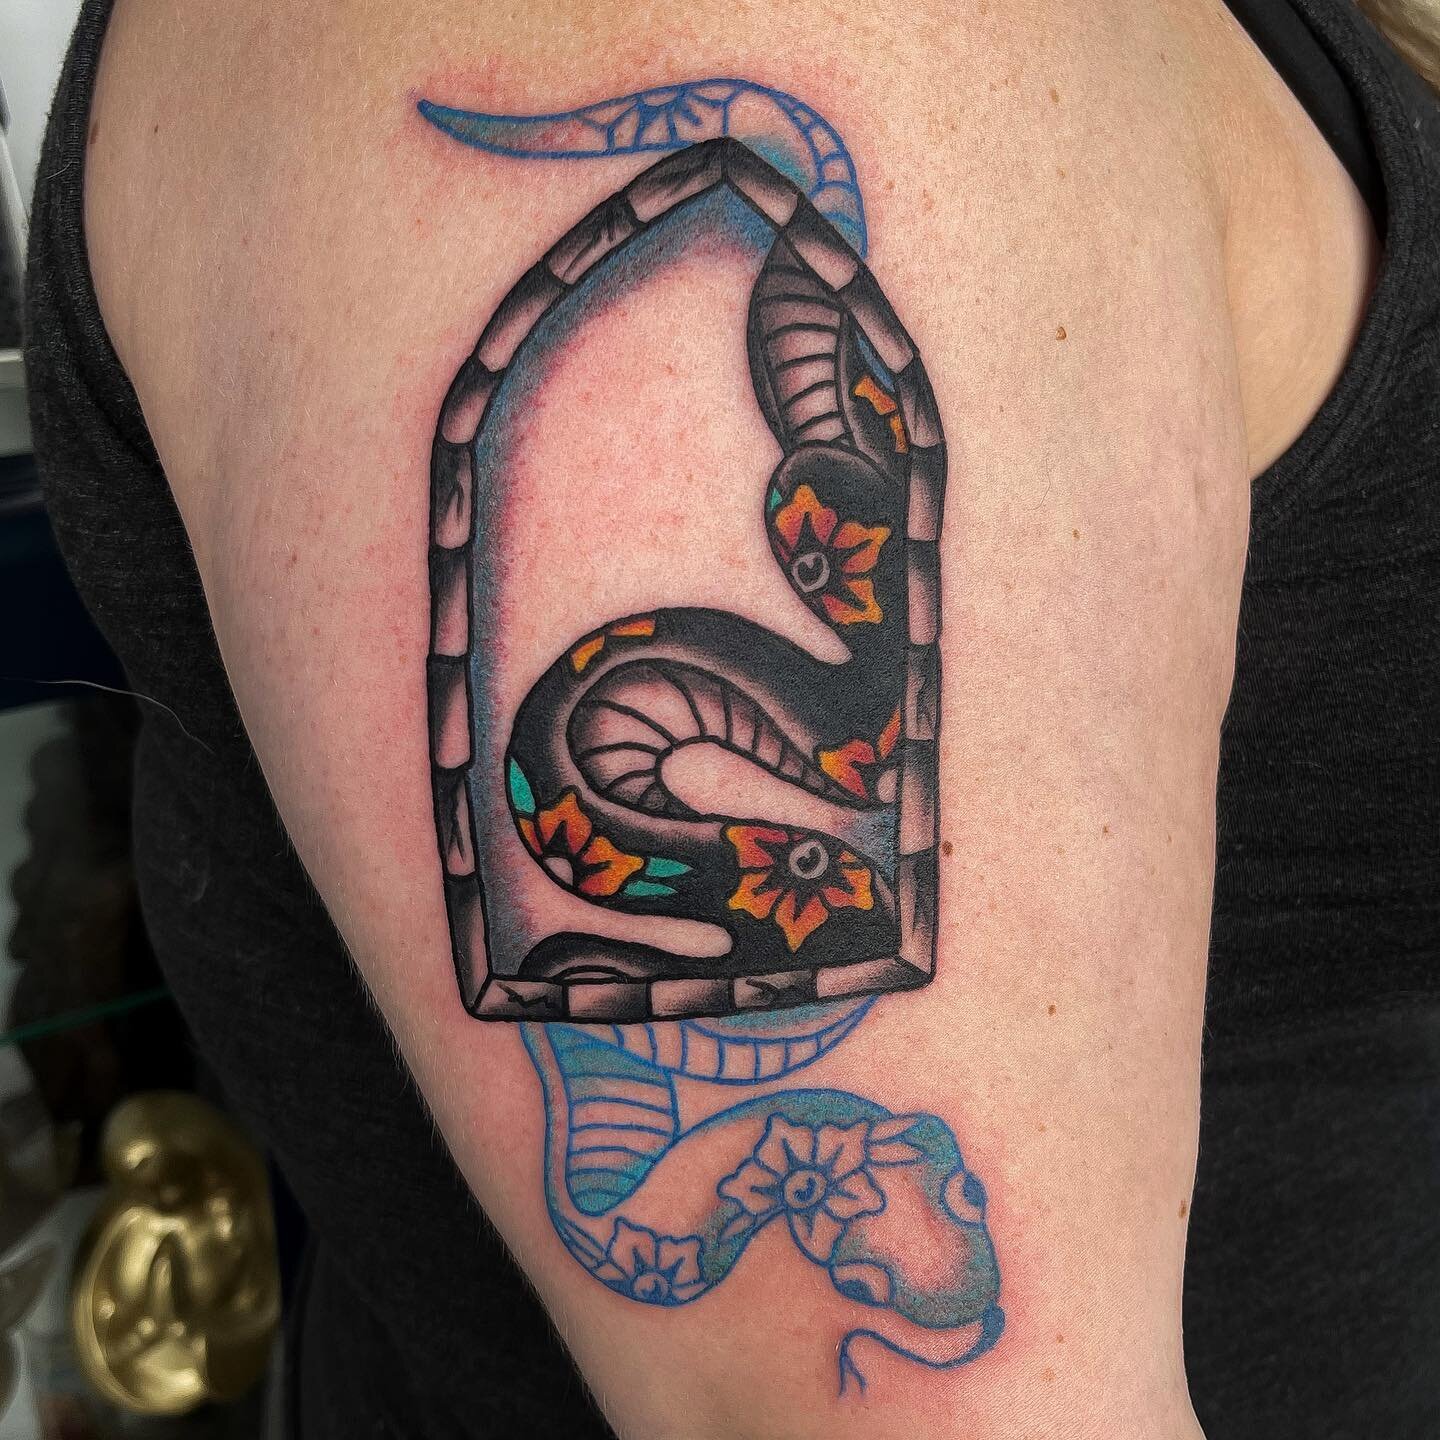 A very fun snake and some new flash ! I have a few random openings this week - dr.crimeboy@gmail for appointments, thank you !
#tradworkers #traditionaltattoo #americantraditionaltattoo #tradtattoos #skinart_traditional #usatraditional @saidanddoneta